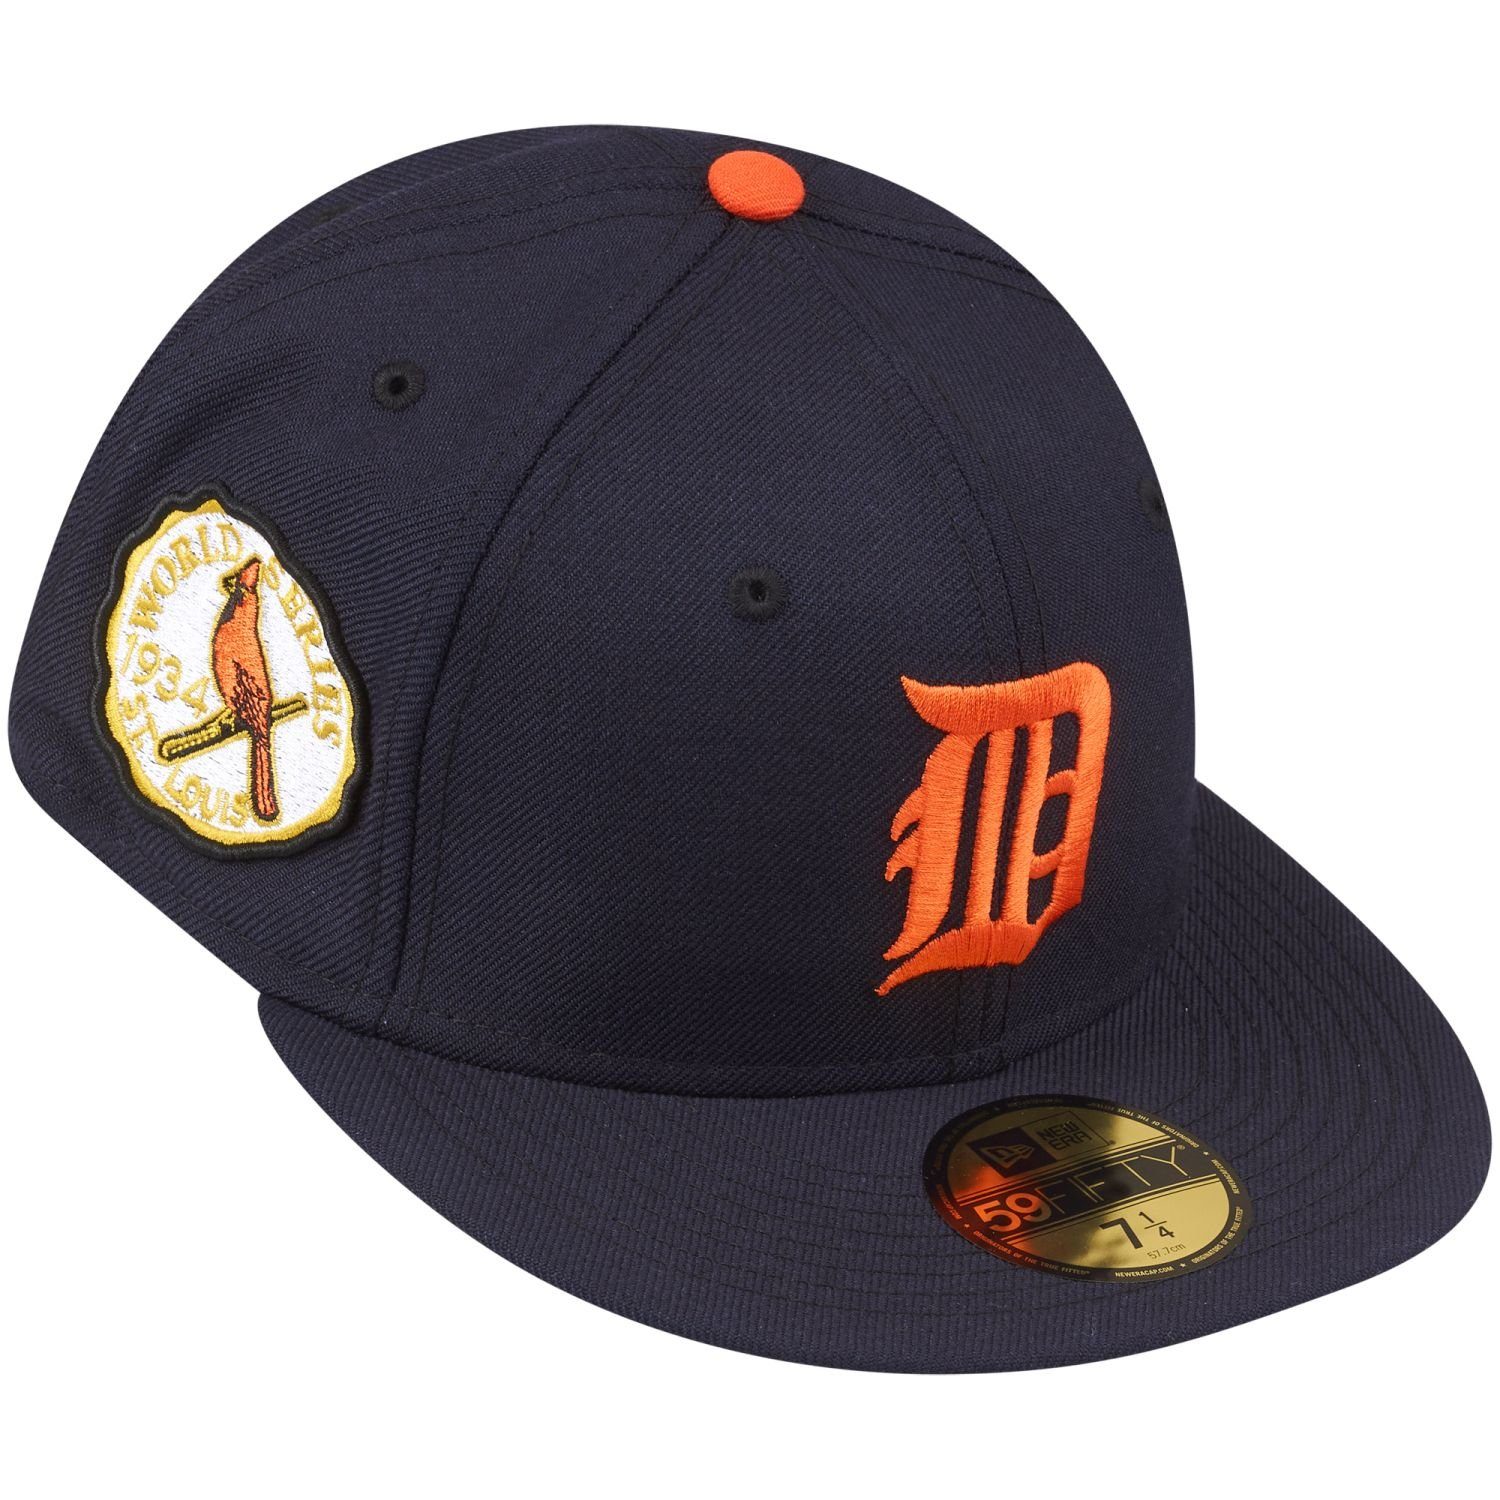 Cap 1934 Detroit New Fitted Tigers 59Fifty Era COOPERSTOWN